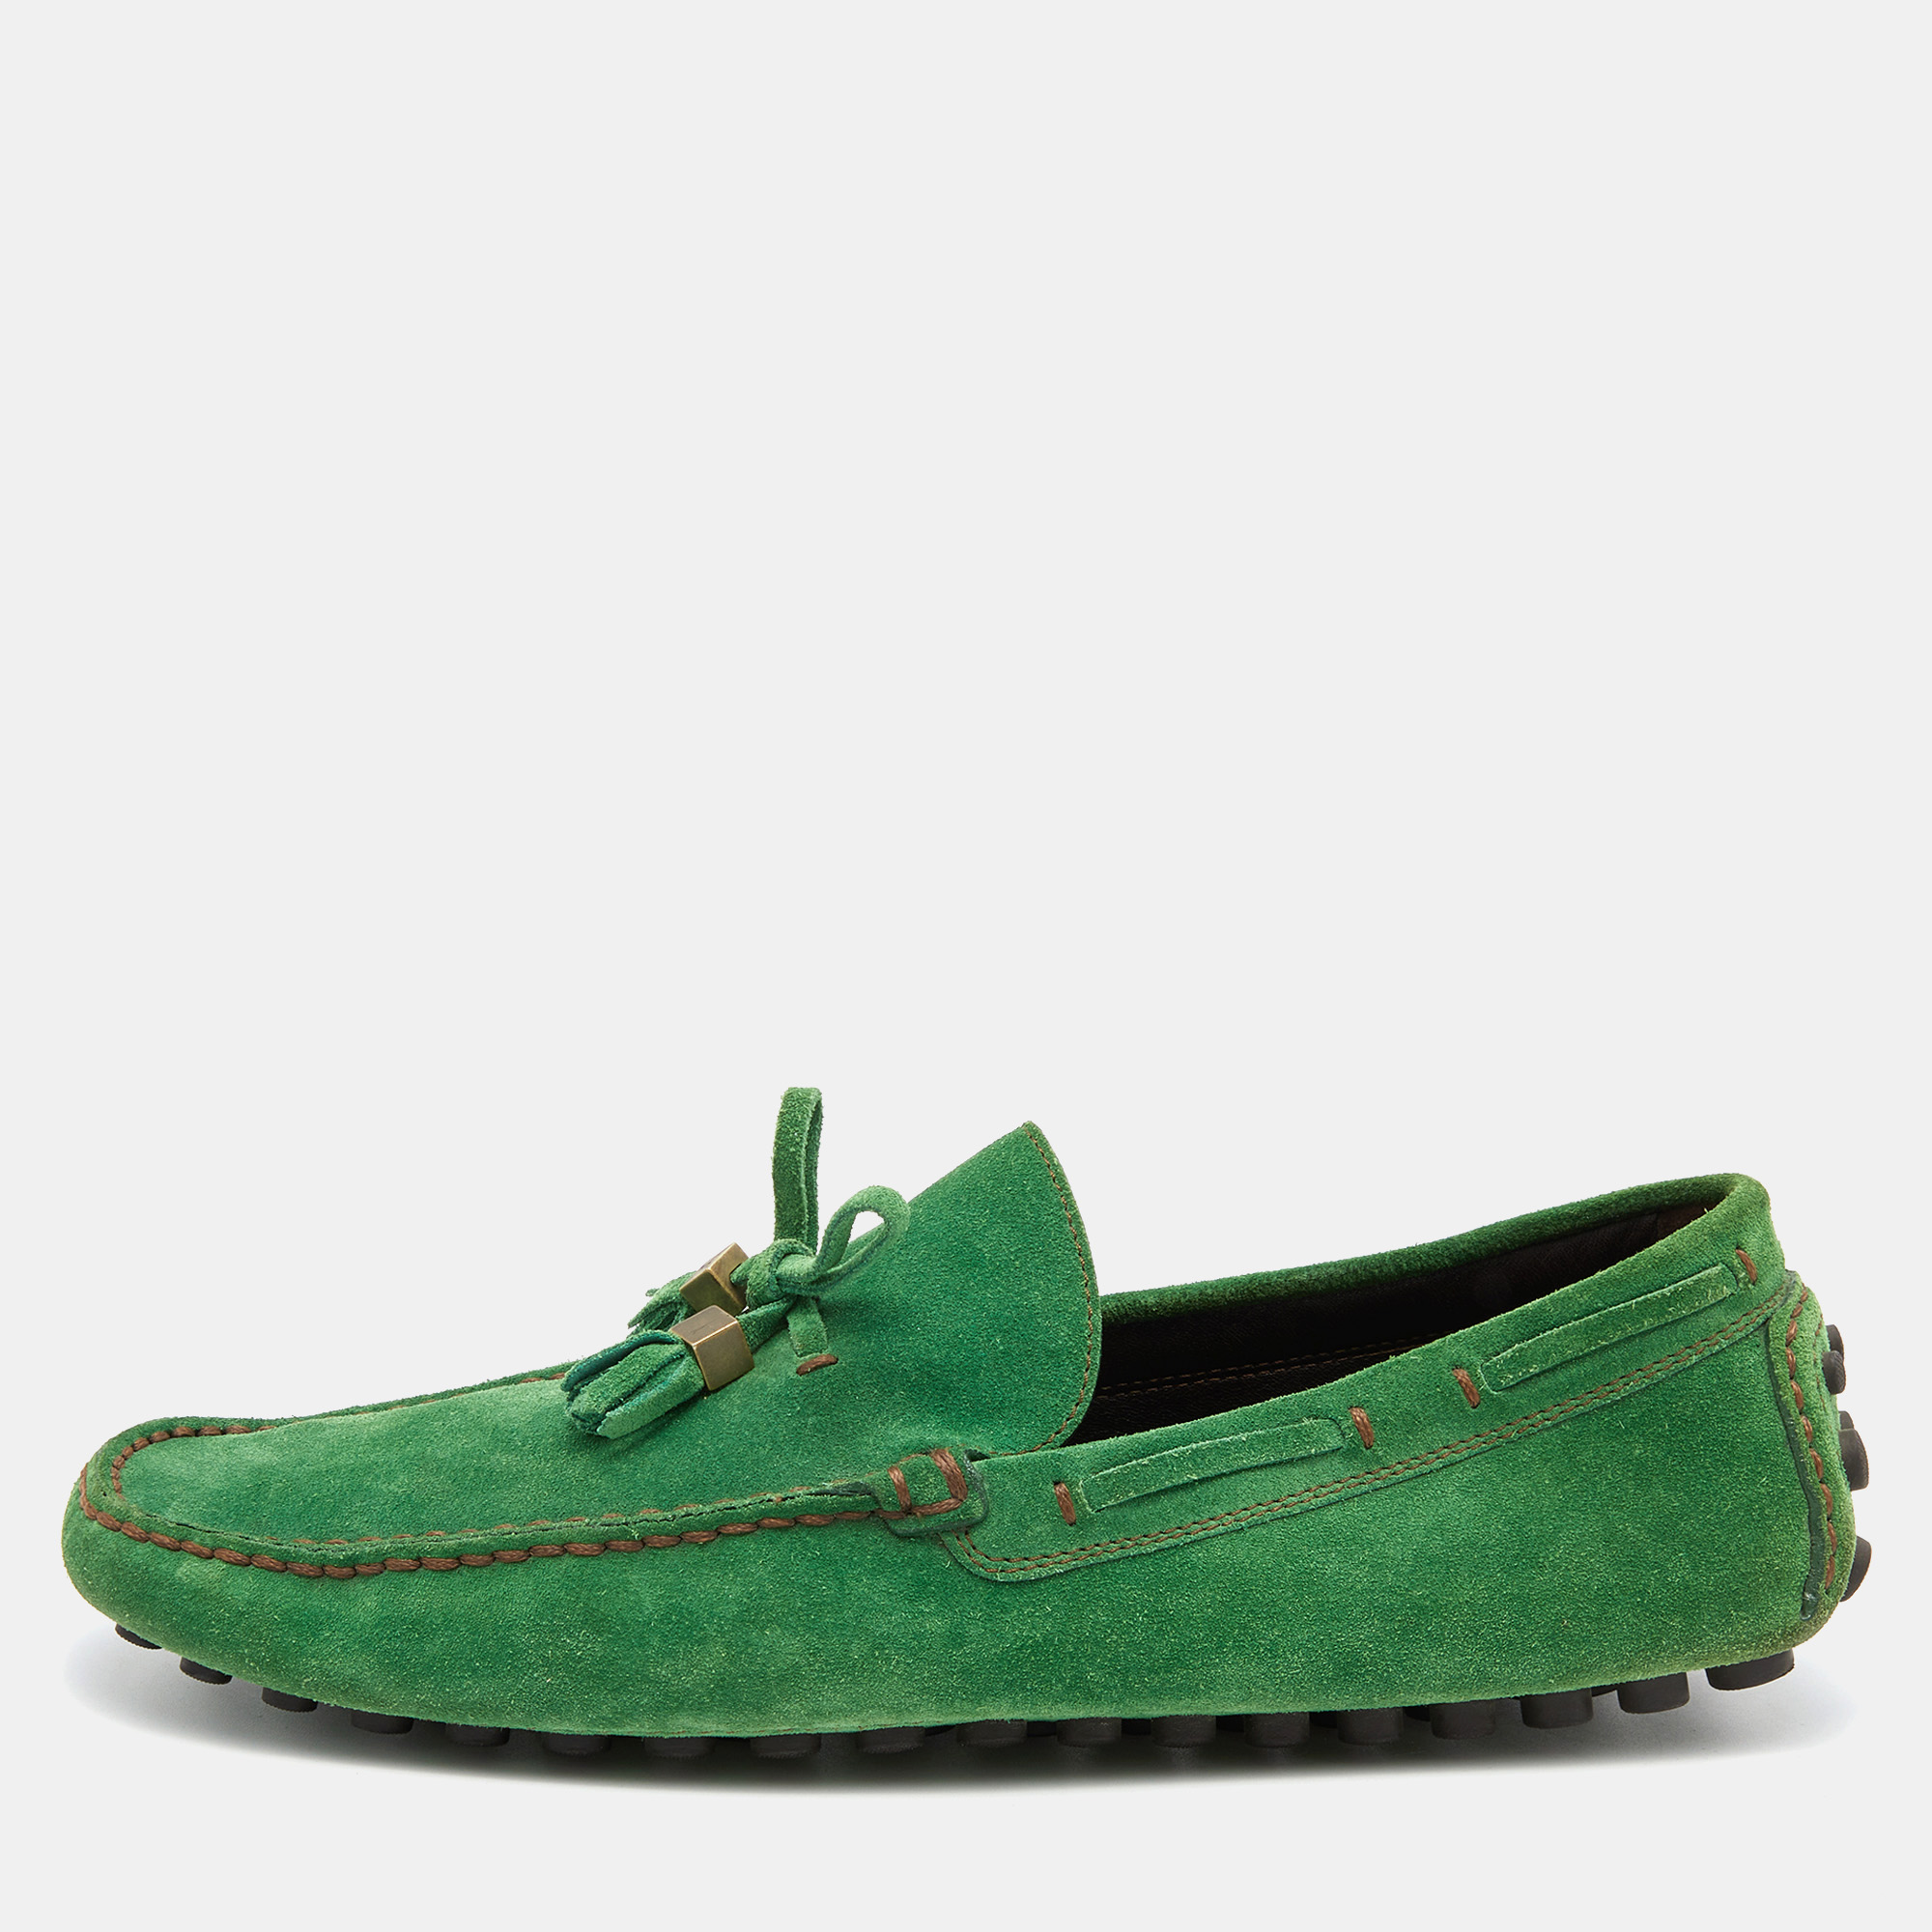 Pre-owned Louis Vuitton Green Suede Imola Tassel Slip On Loafers Size 41.5